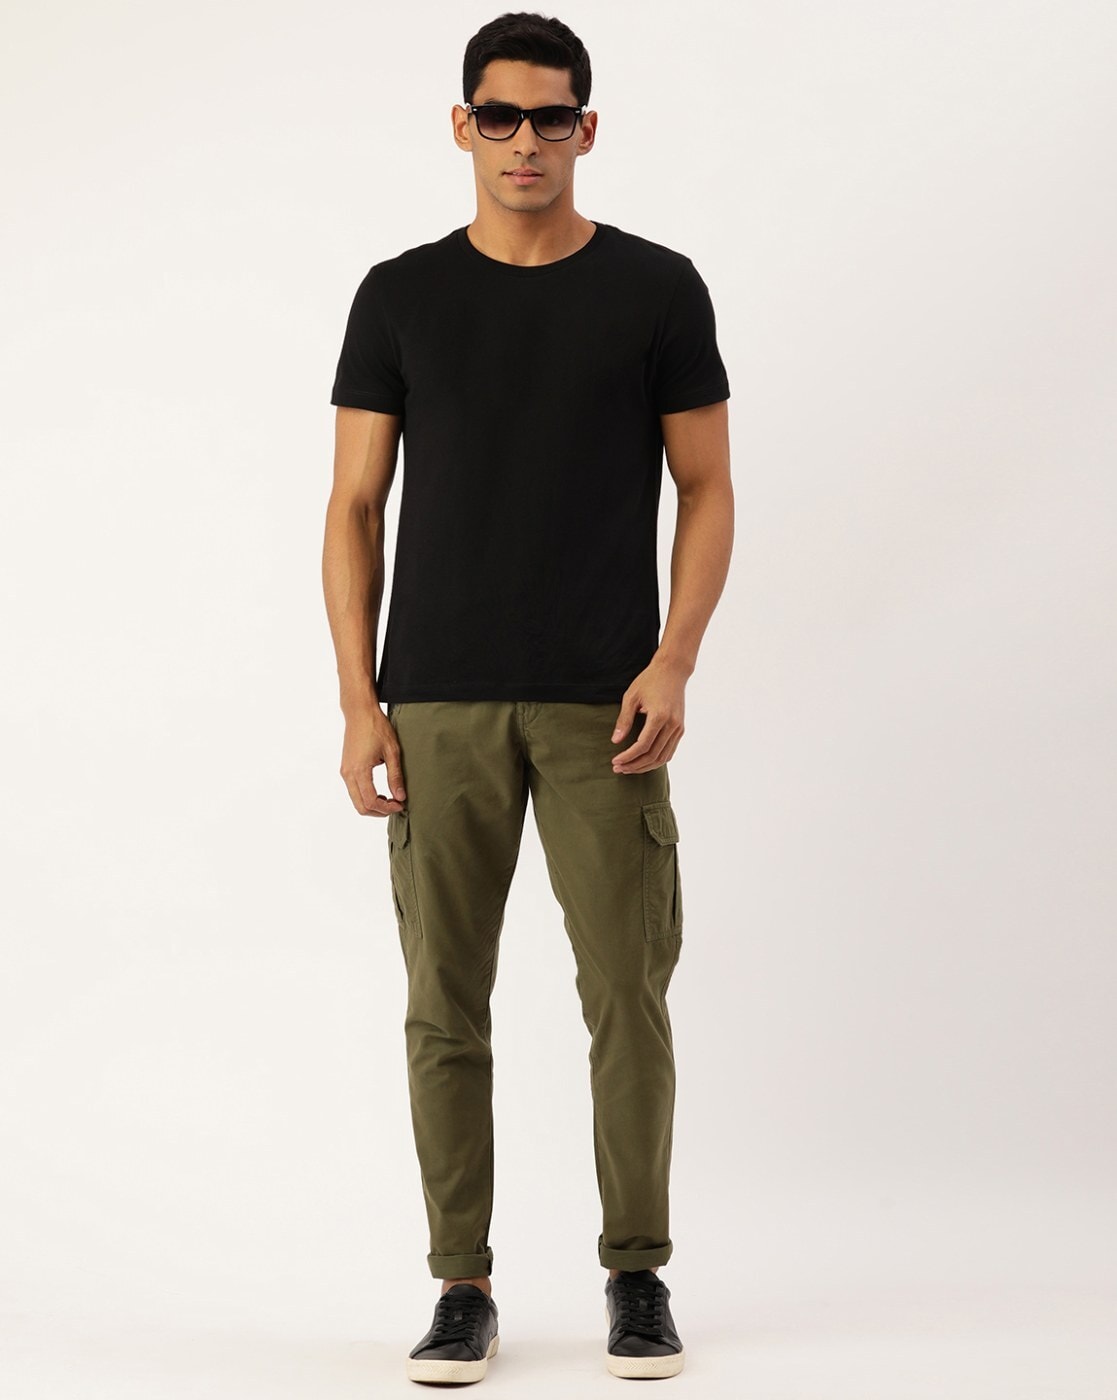 Black top olive green pants outfit  Green pants outfit Olive green pants  outfit Olive green pants